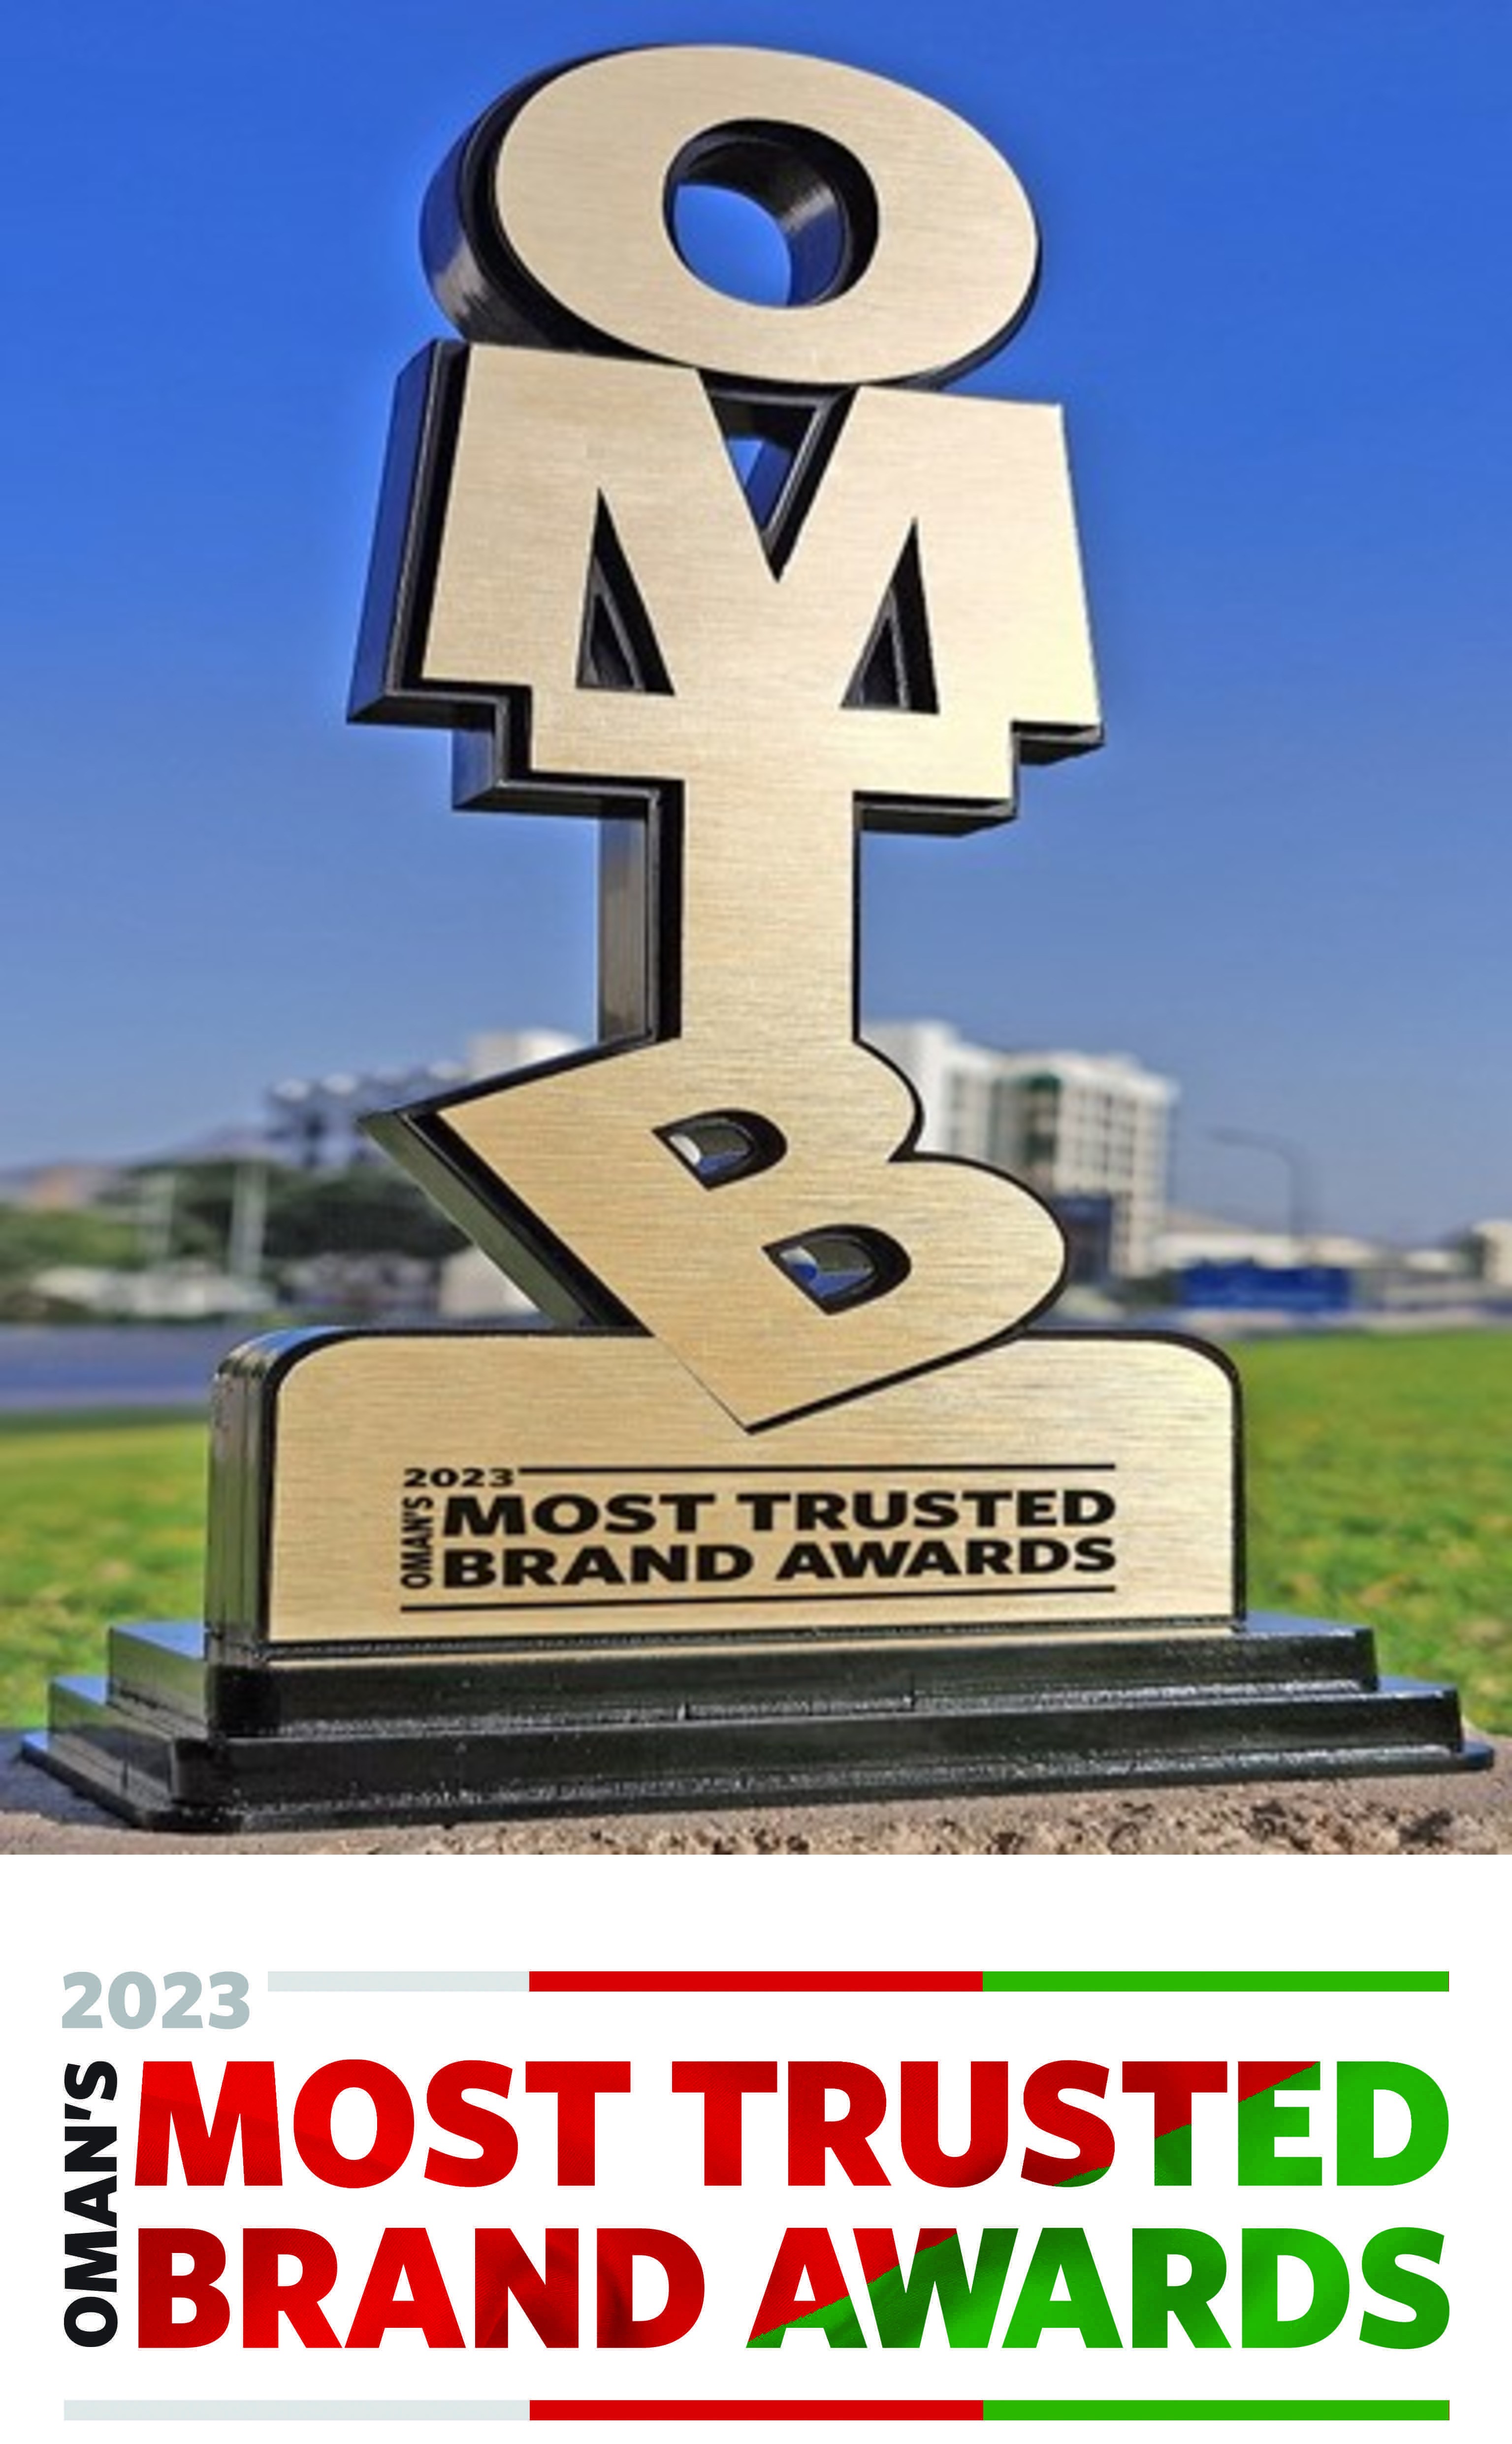 Most trusted finance brand in Oman